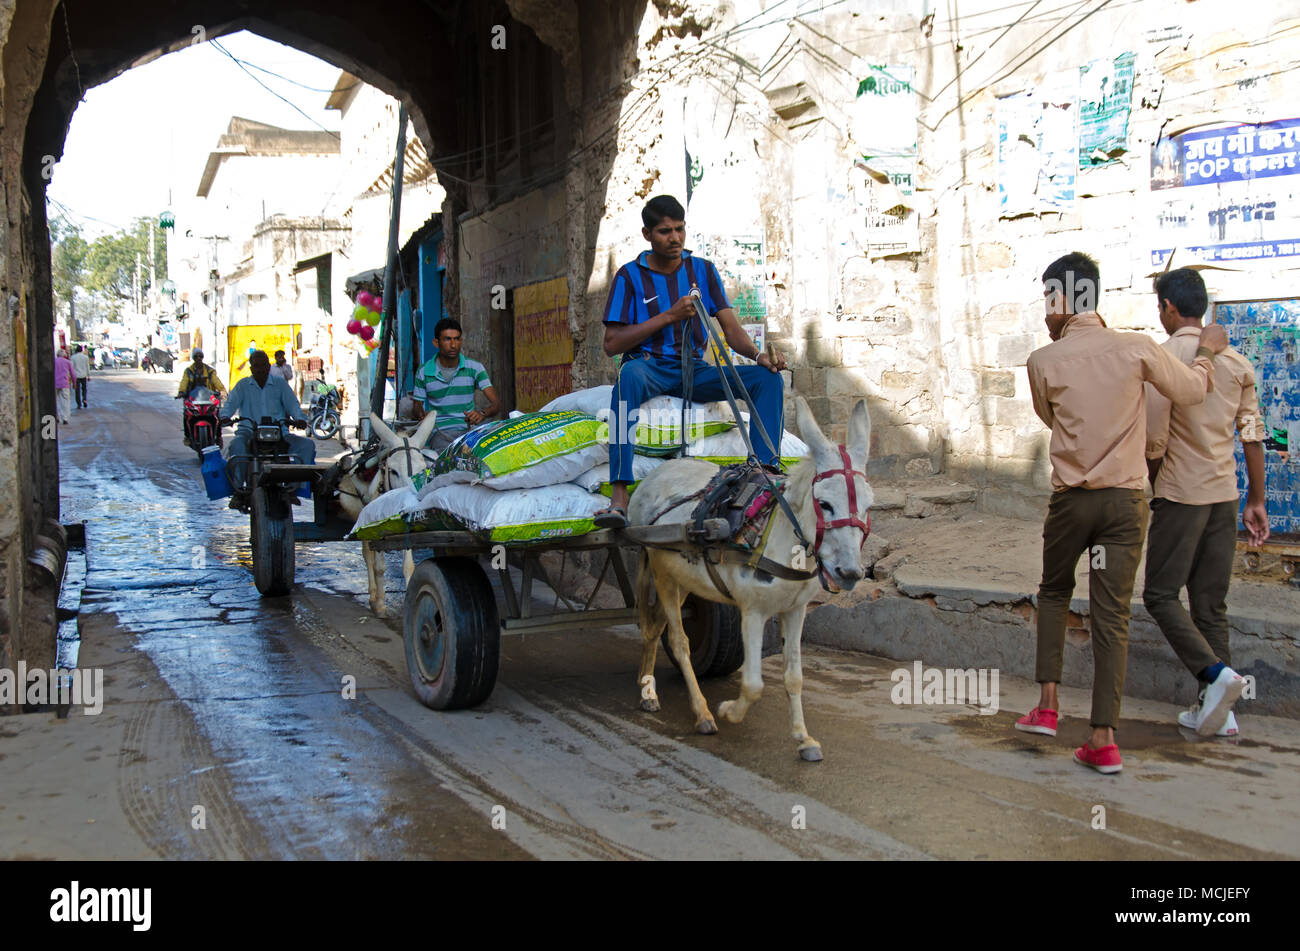 Mandawa, India - February 24, 2018: Street view with people on the street and a donkey carrying a loads. Stock Photo